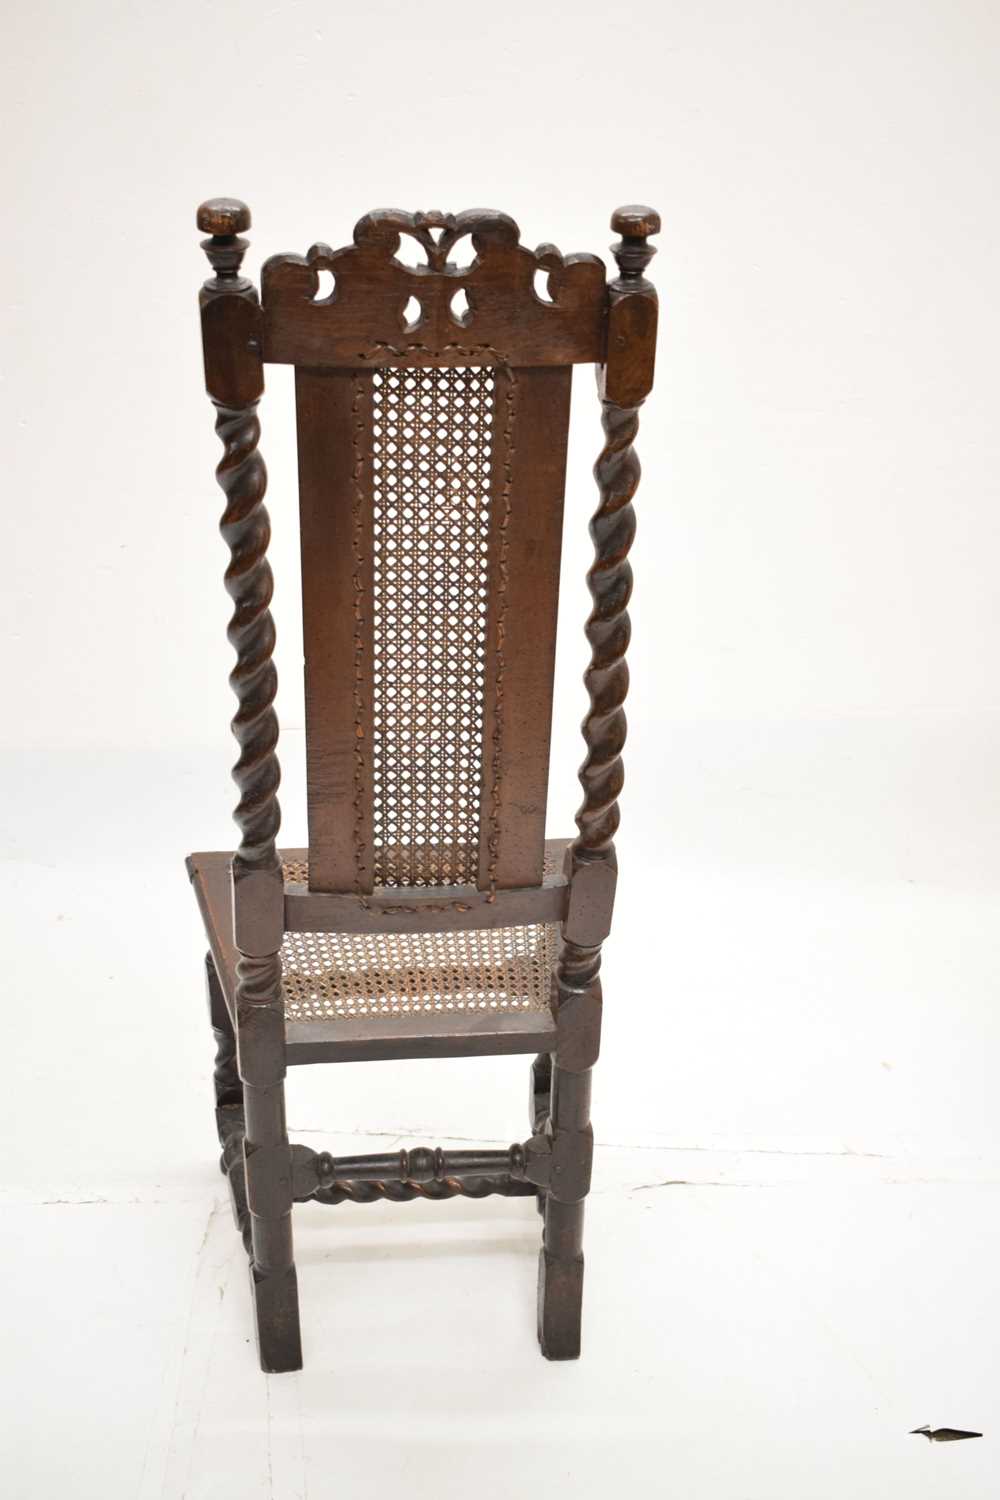 Late 17th century walnut and cane high-back chair - Image 7 of 15